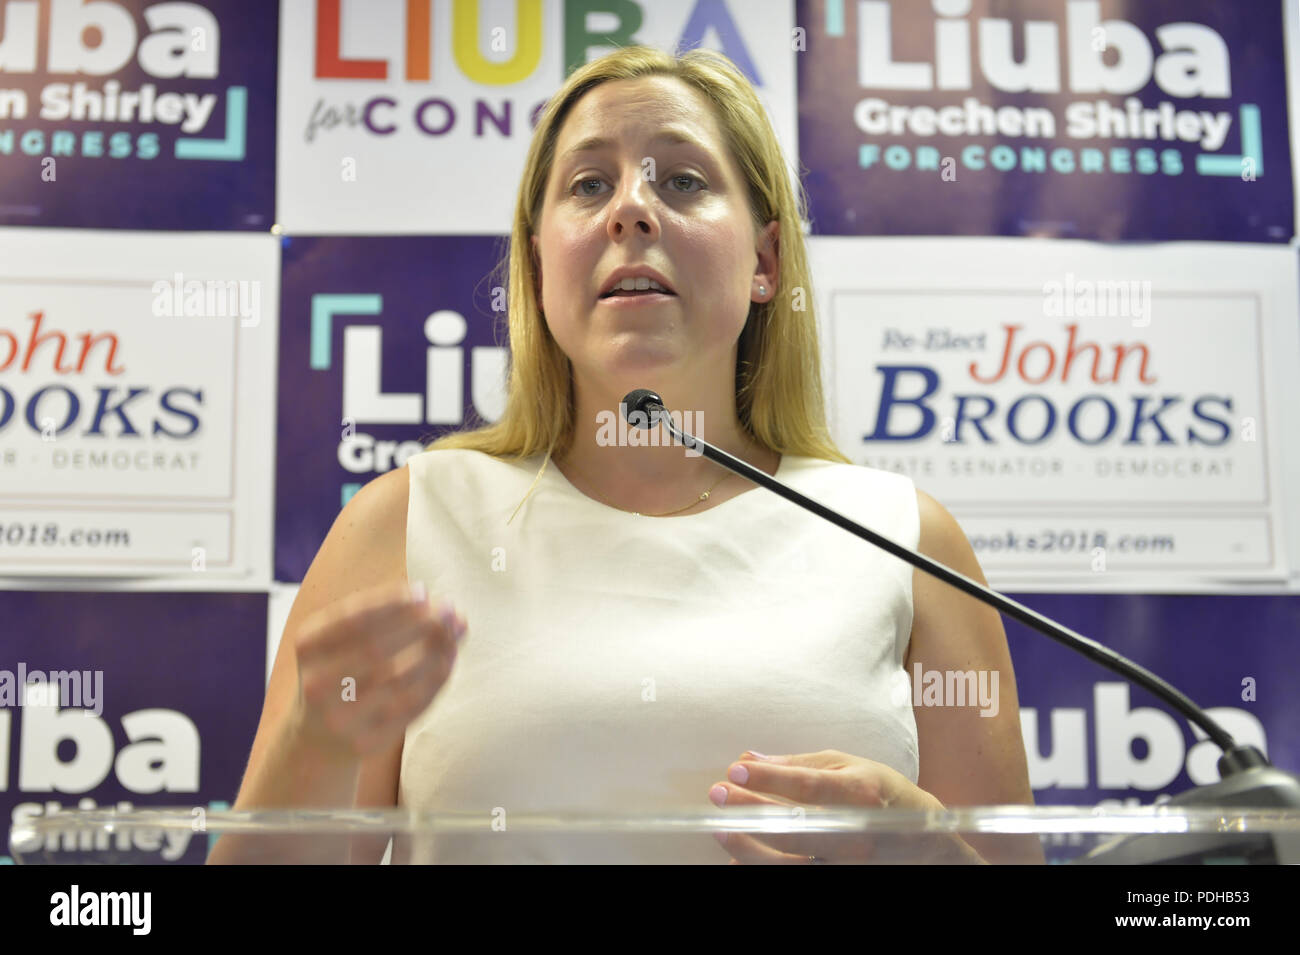 Massapequa, New York, USA. 5th Aug, 2018. LIUBA GRECHEN SHIRLEY, Congressional candidate for NY 2nd District, speaks at podium at joint campaign office opening for her and NY Senator John Brooks, aiming for a Democratic Blue Wave in November midterm elections. Credit: Ann Parry/ZUMA Wire/Alamy Live News Stock Photo